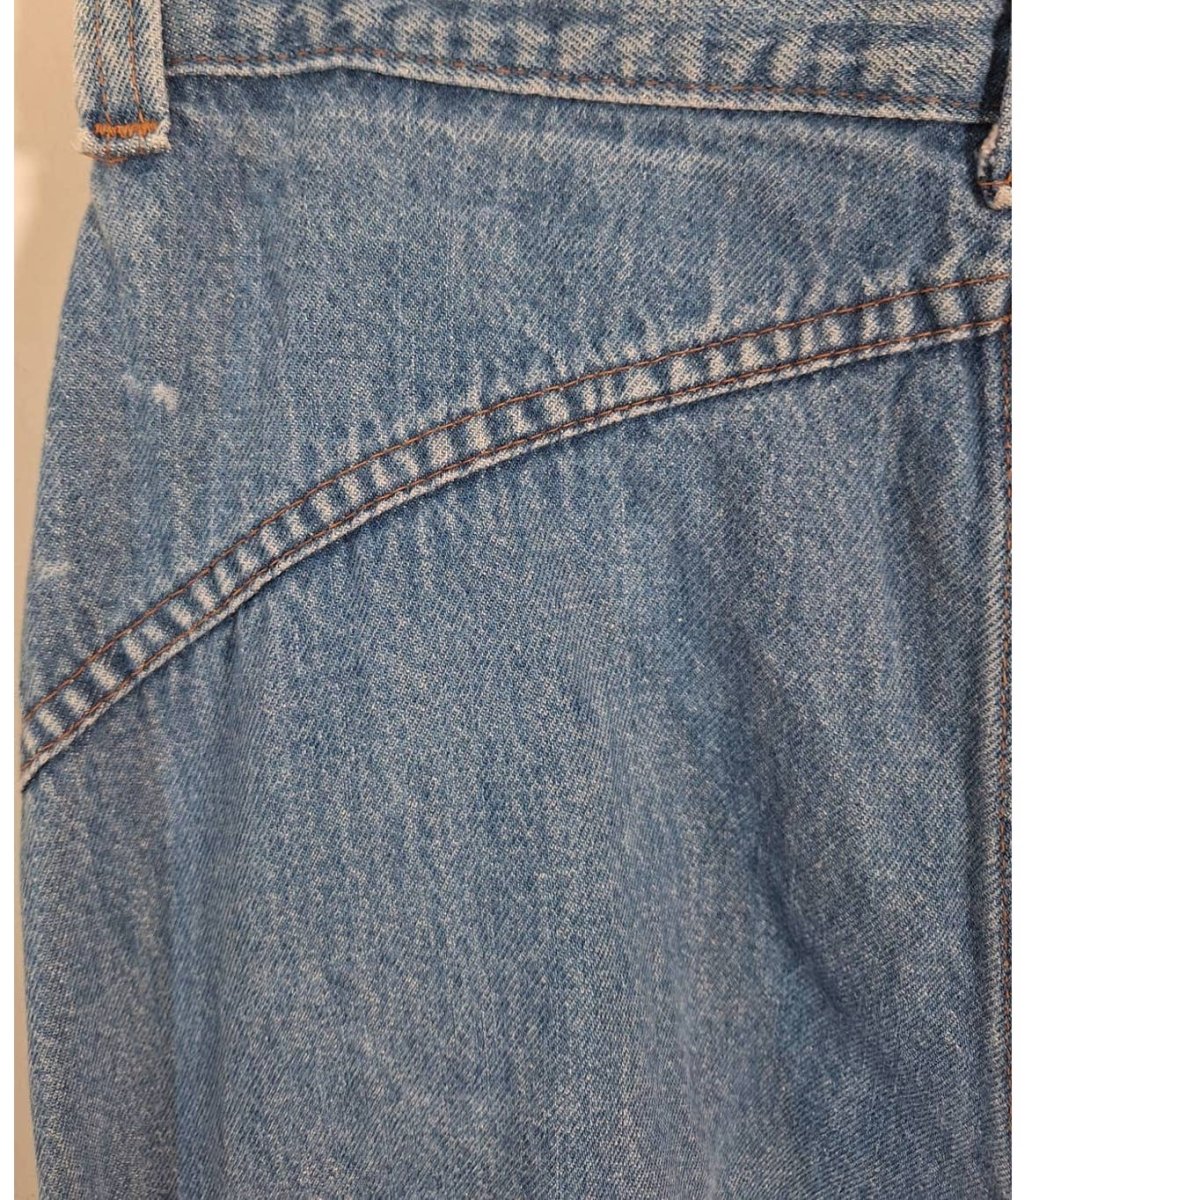 Vintage 80s High Waist Pleated Jeans with Yoke Size Waist 30 - themallvintage The Mall Vintage